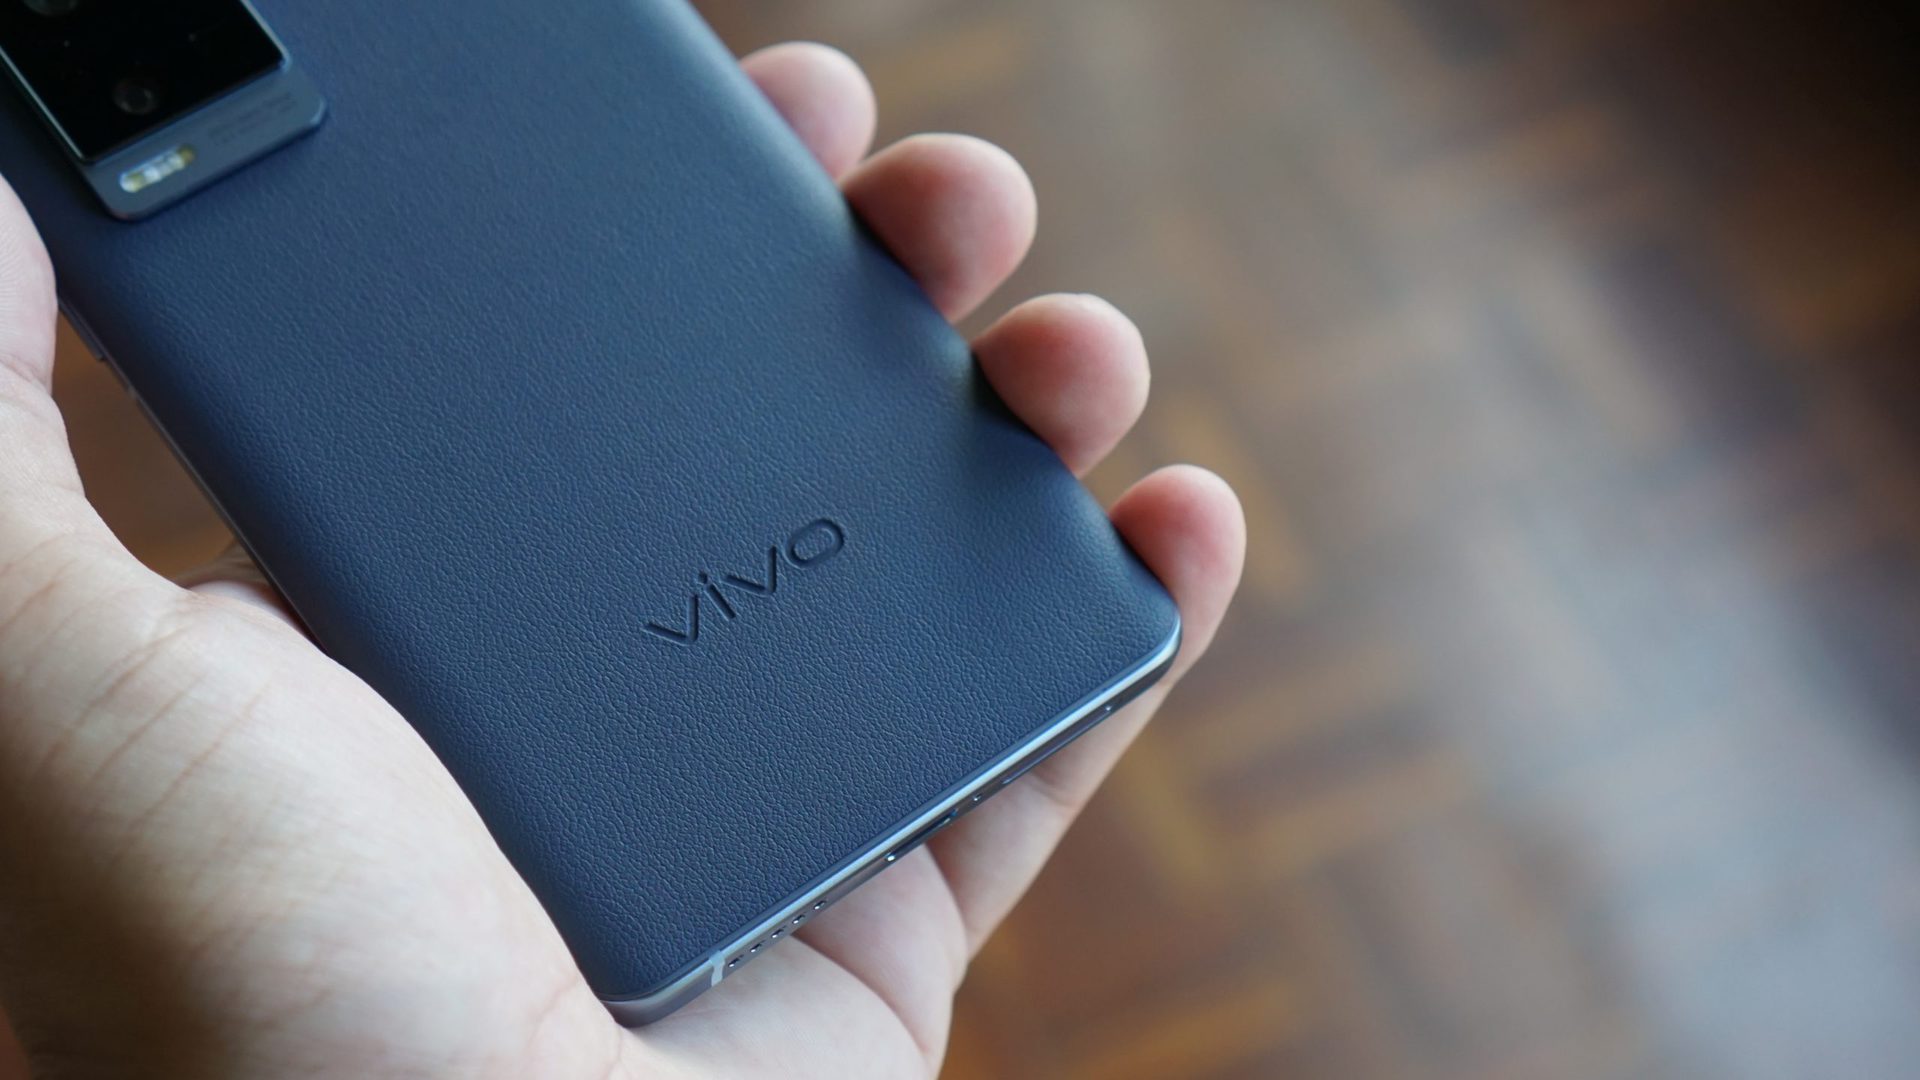 Vivo X60 Pro Plus in hand showing logo and rear of phone